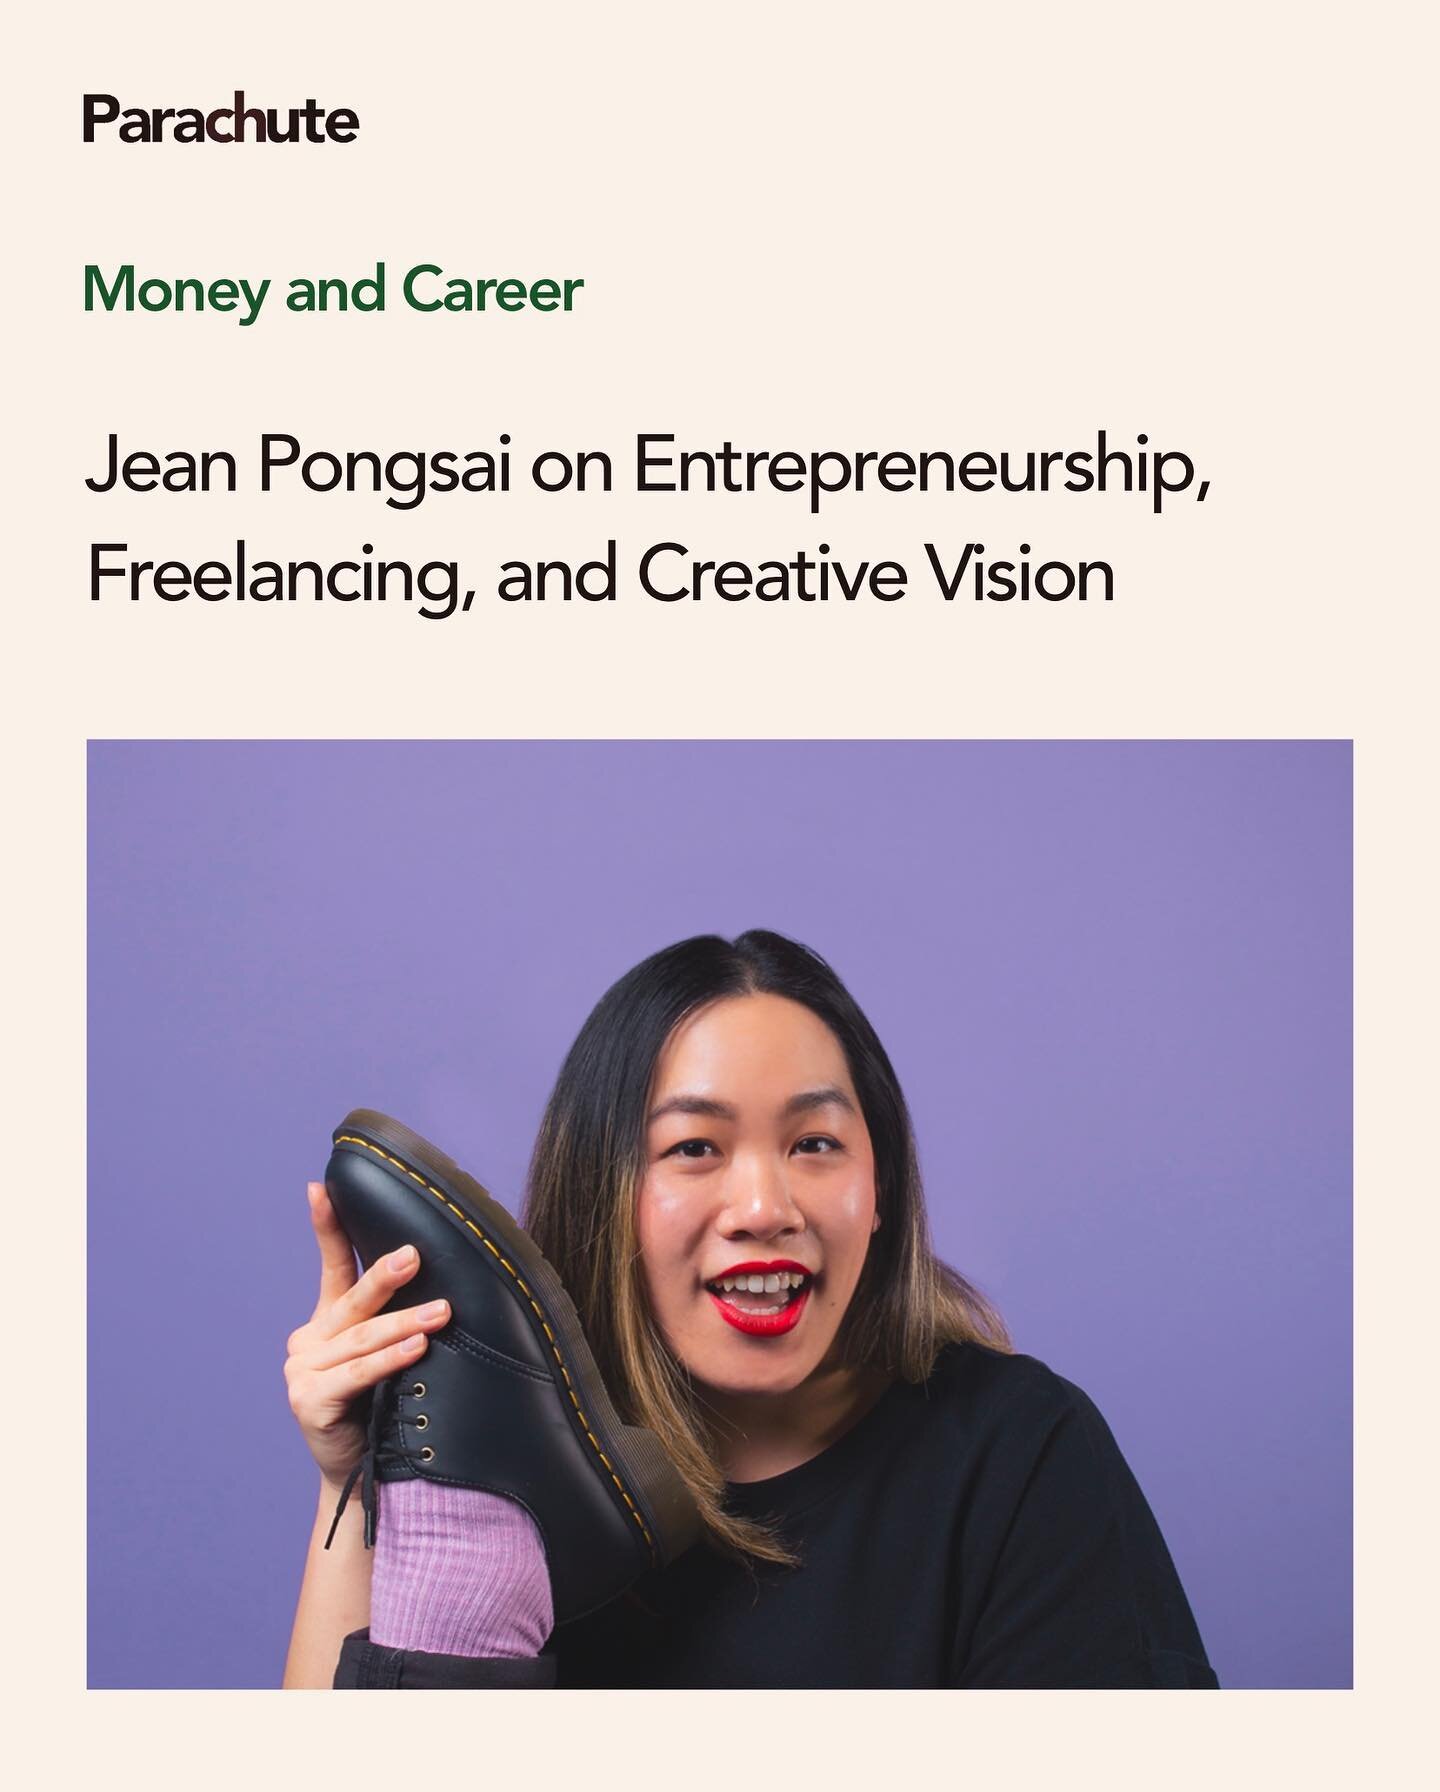 Head to our link in bio to learn more about Jean Pongsai and her tips and tricks for young entrepreneurs in this week's &quot;Money and Career&quot; section!⁠⁠
⁠⁠
Content: Sam Nguyen
Graphic: @laurwang 
⁠⁠
#money #career #young #entrepreneur #entrepr